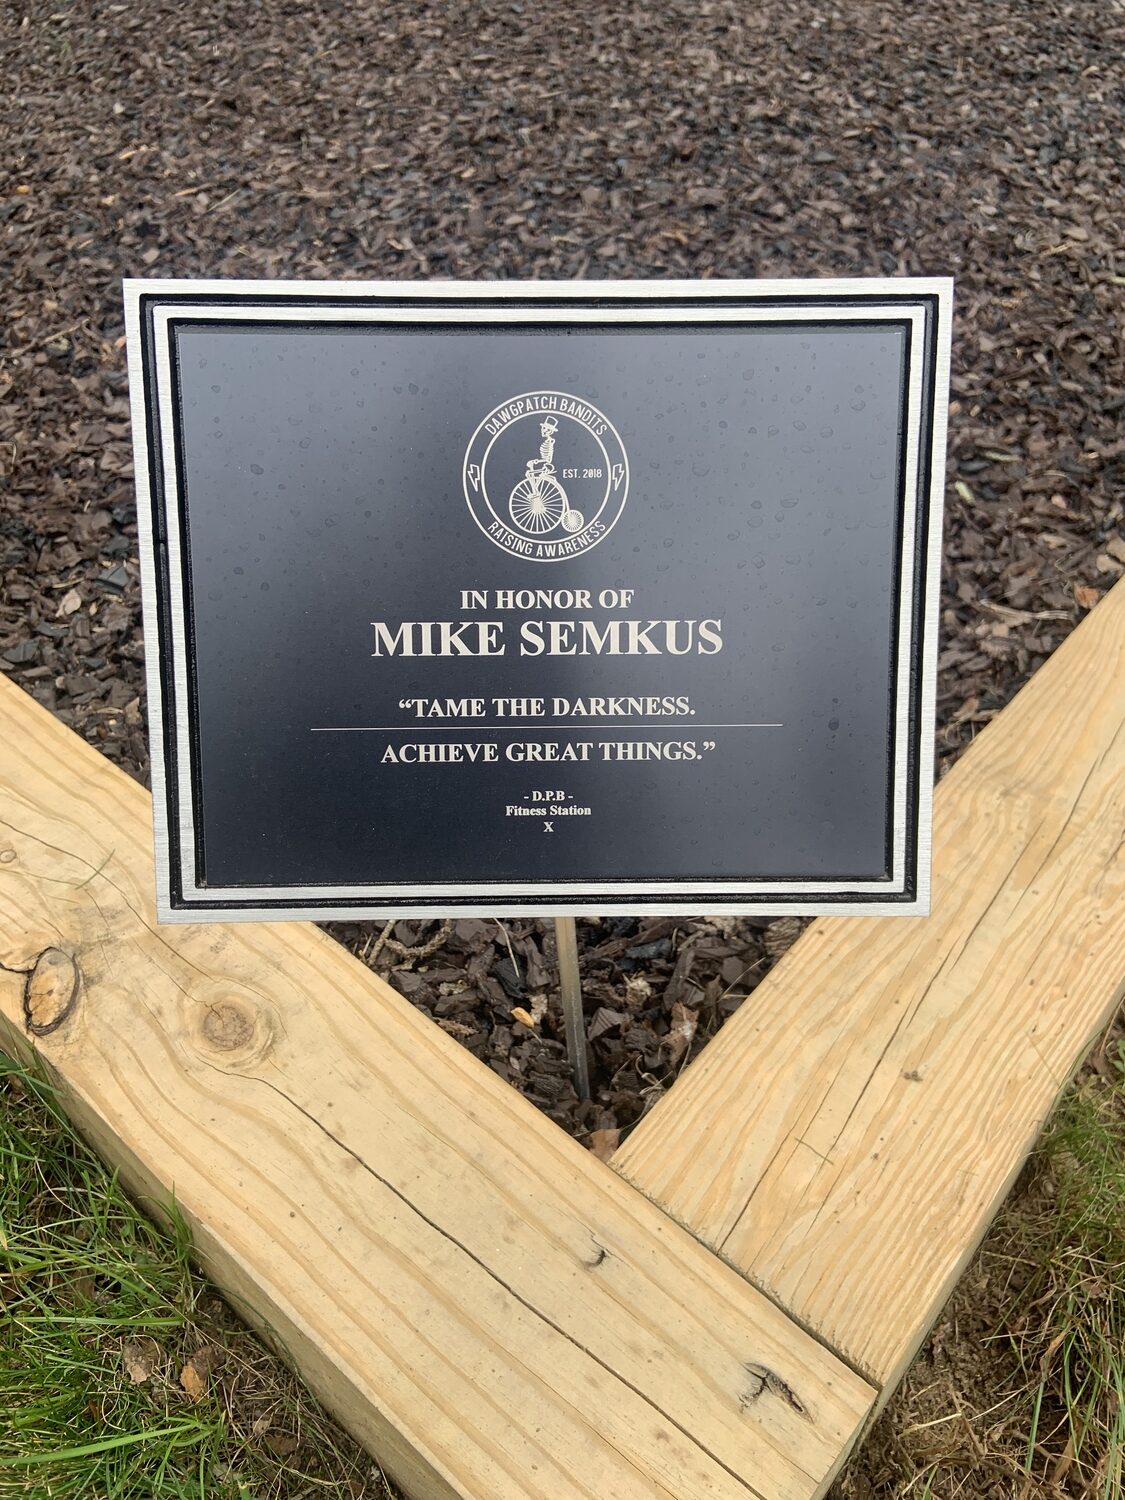 A plaque dedicating the workout station at Phoenix House to the memory of Mike Semkus. STEPHEN J. KOTZ